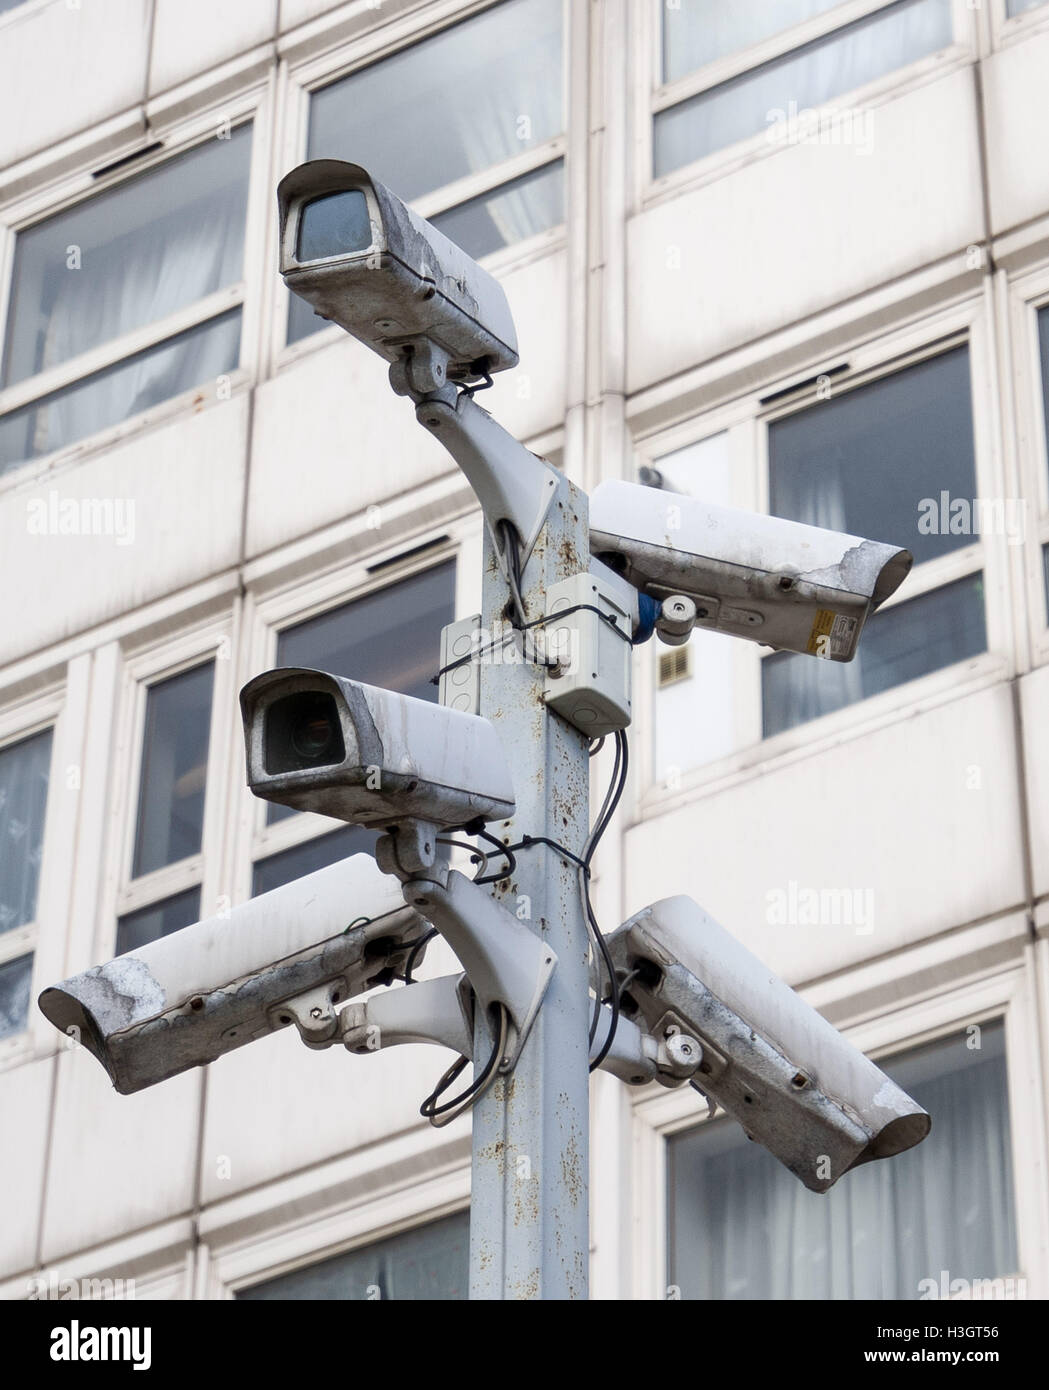 Closed-circuit CCTV surveillance cameras seen in south east London, UK  Stock Photo - Alamy